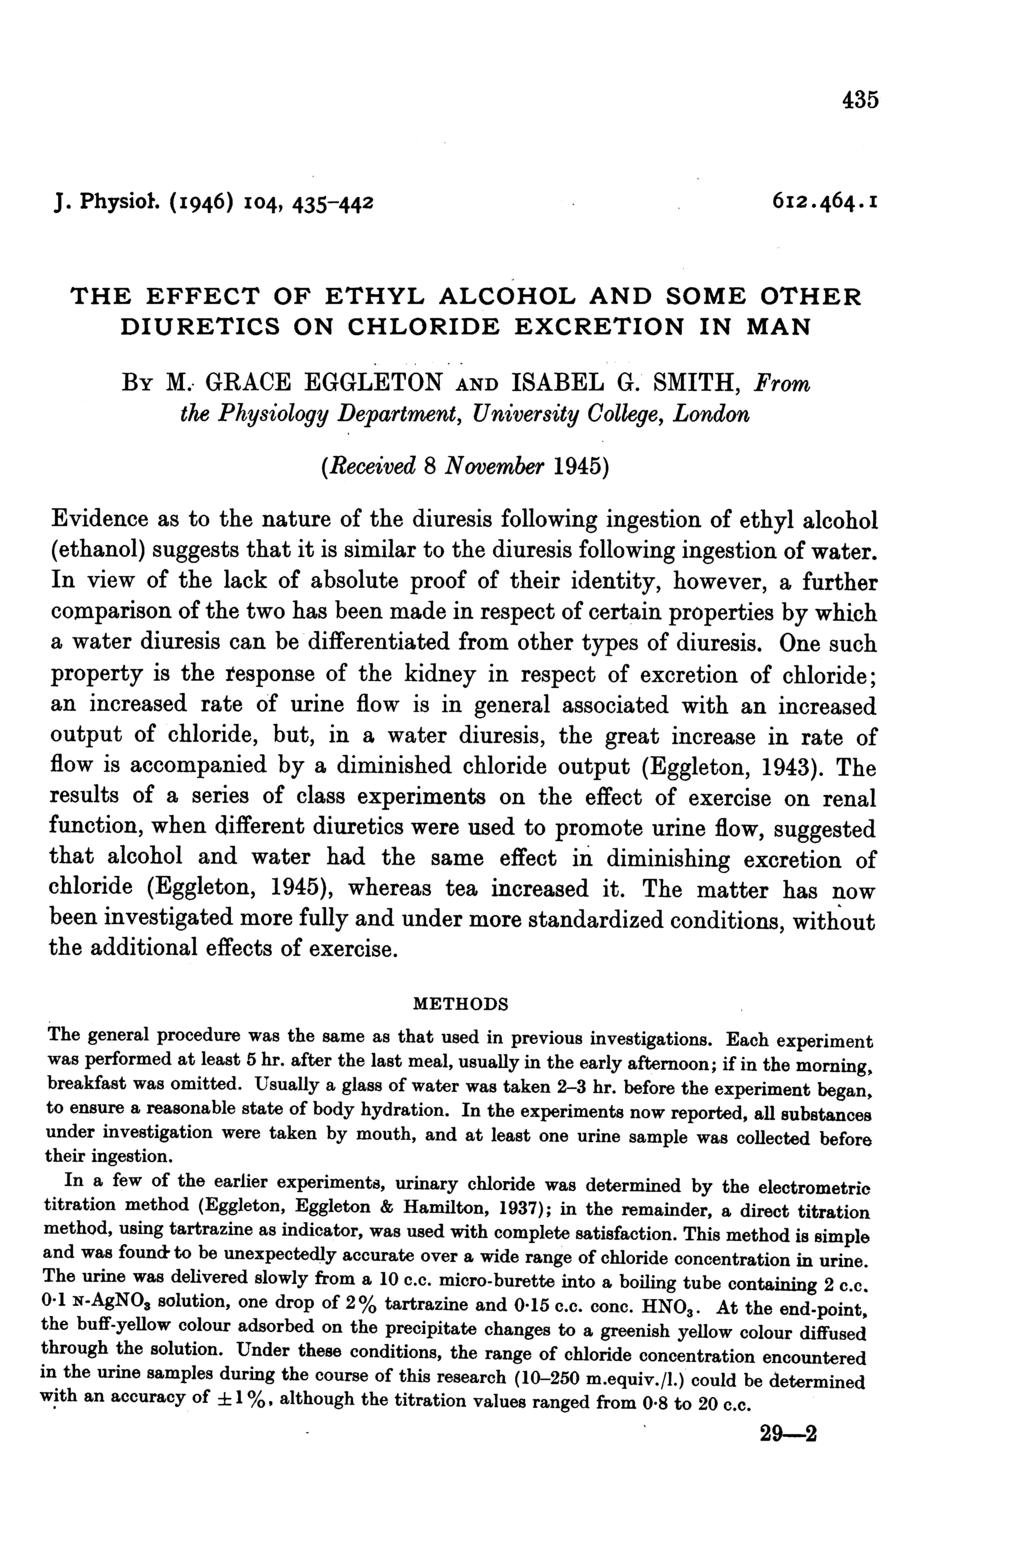 435 J. Physiol. (I946) I04, 435-442 6I2.464.I THE EFFECT OF ETHYL ALCOHOL AND SOME OTHER DIURETICS ON CHLORIDE EXCRETION IN MAN BY M. GRACE EGGLETON AND ISABEL G.